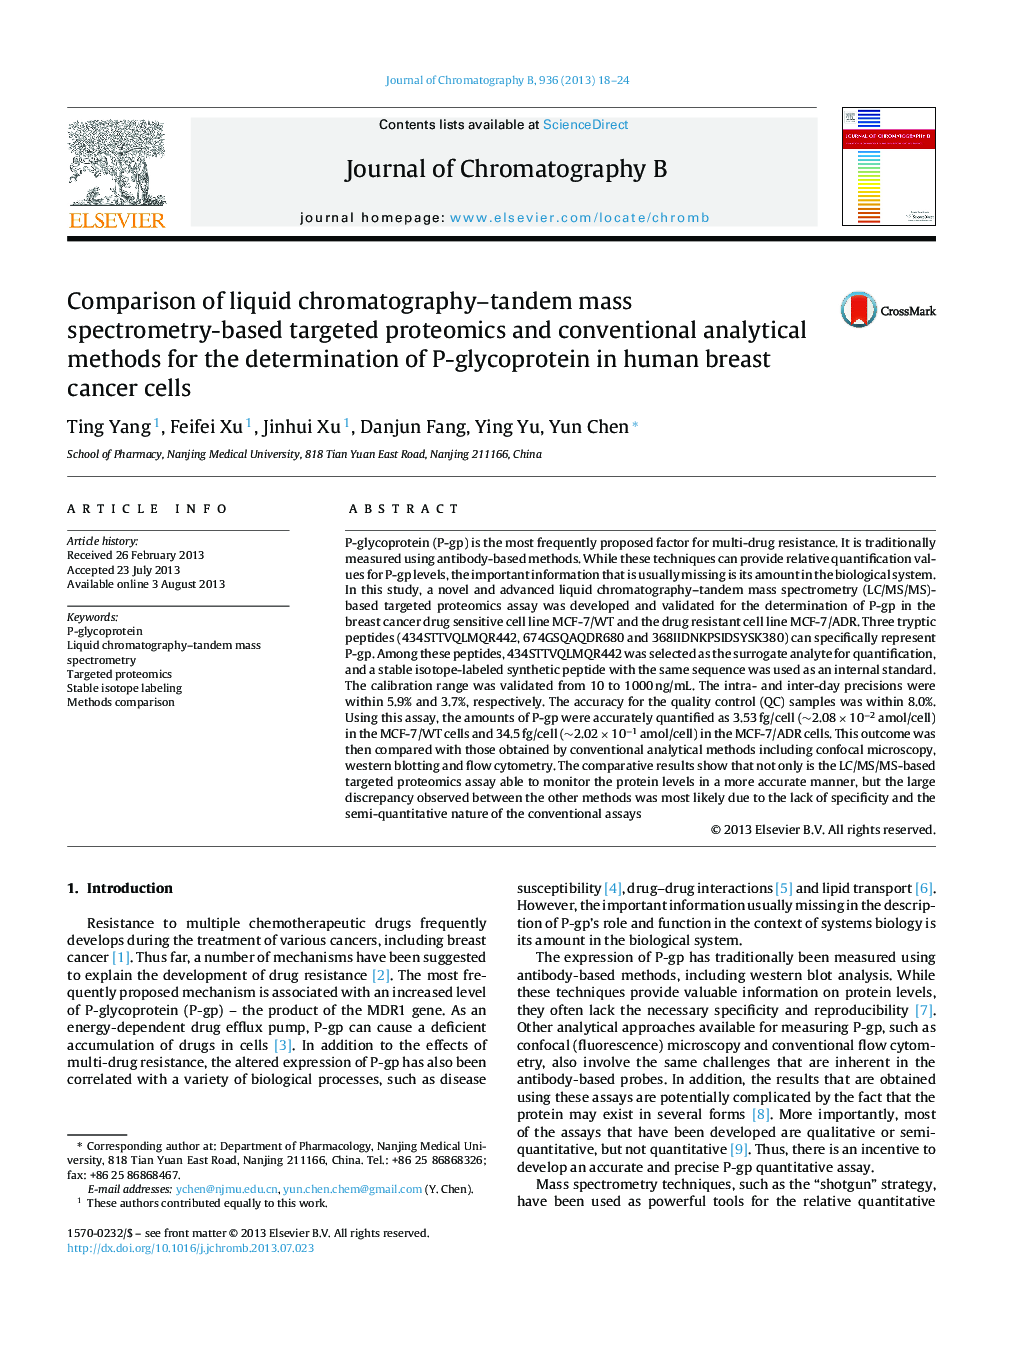 Comparison of liquid chromatography–tandem mass spectrometry-based targeted proteomics and conventional analytical methods for the determination of P-glycoprotein in human breast cancer cells